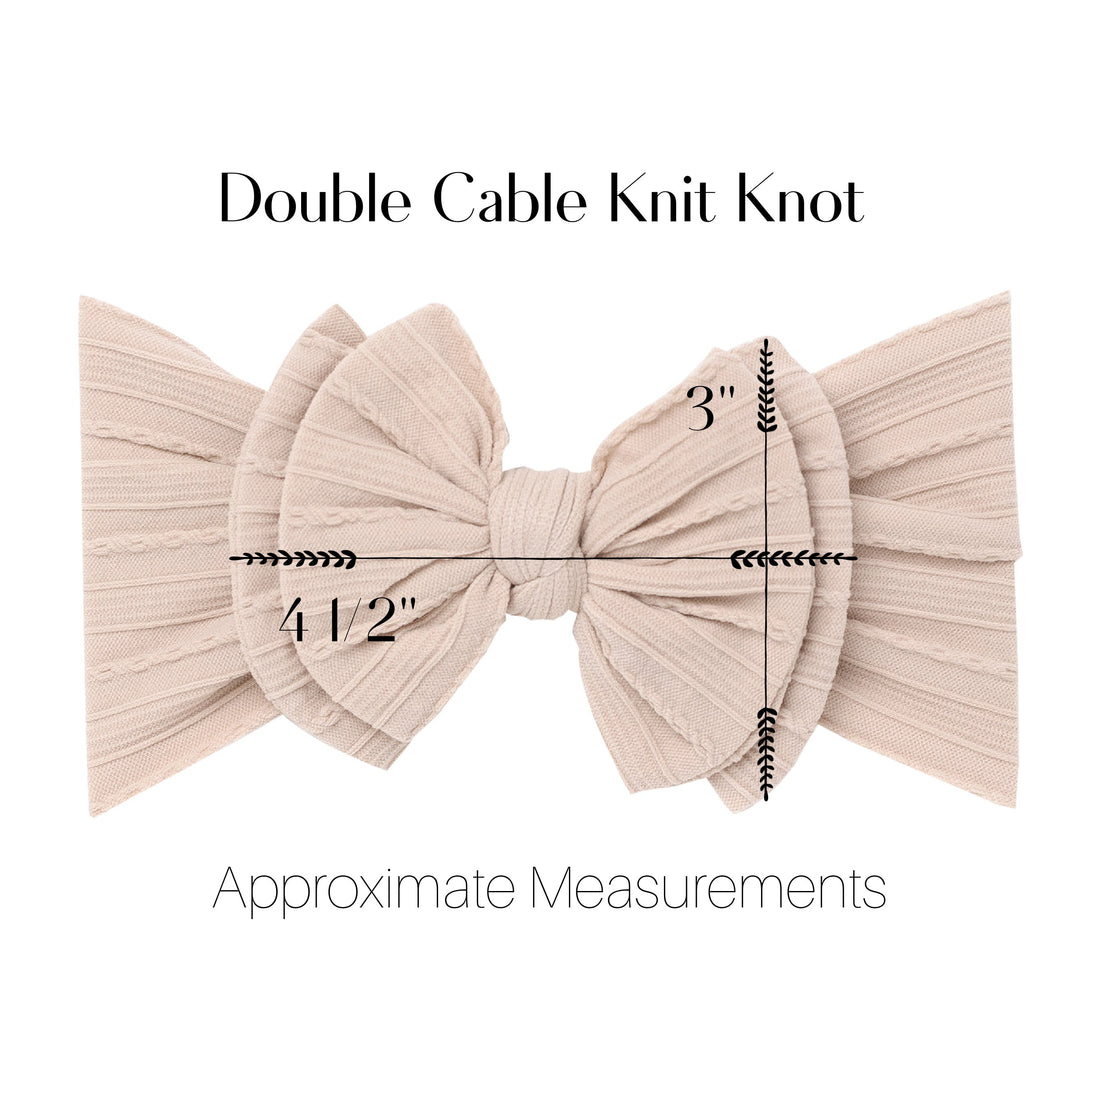 Double Cable Knit Knot - White